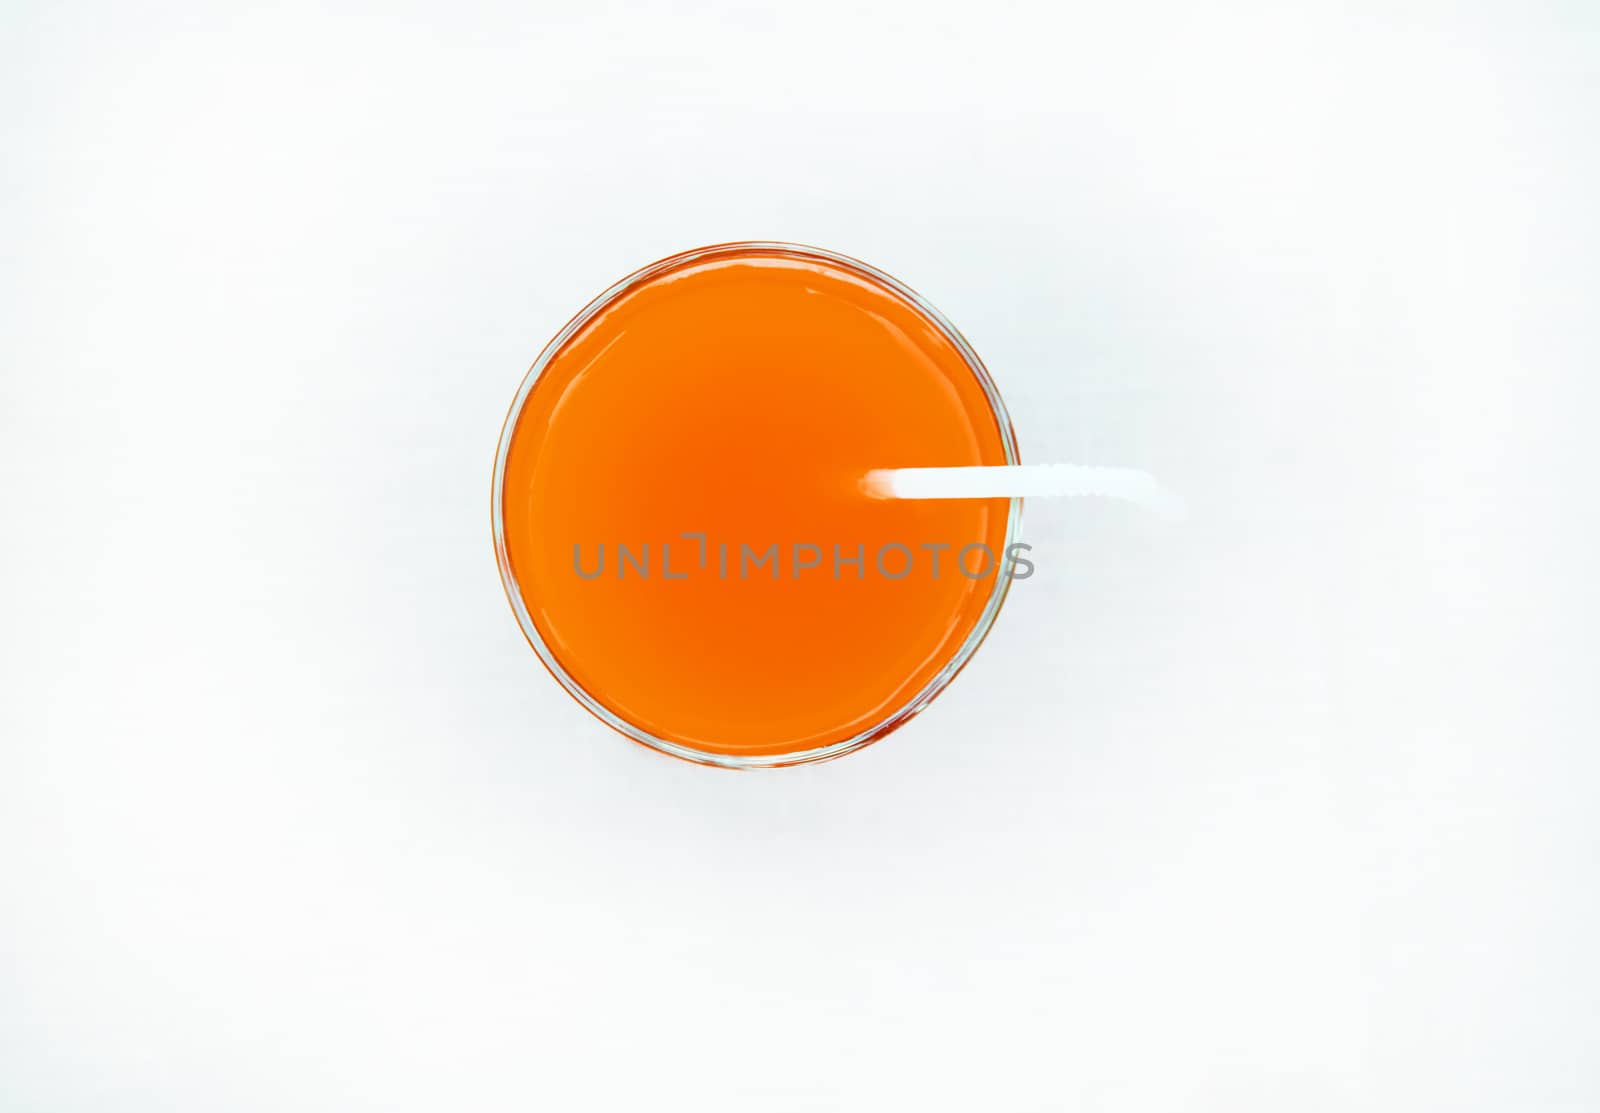 Summer drink - freshly squeezed grapefruit juice in a glass with a straw tube, top view, isolated on a white background with clipping, minimalism by claire_lucia